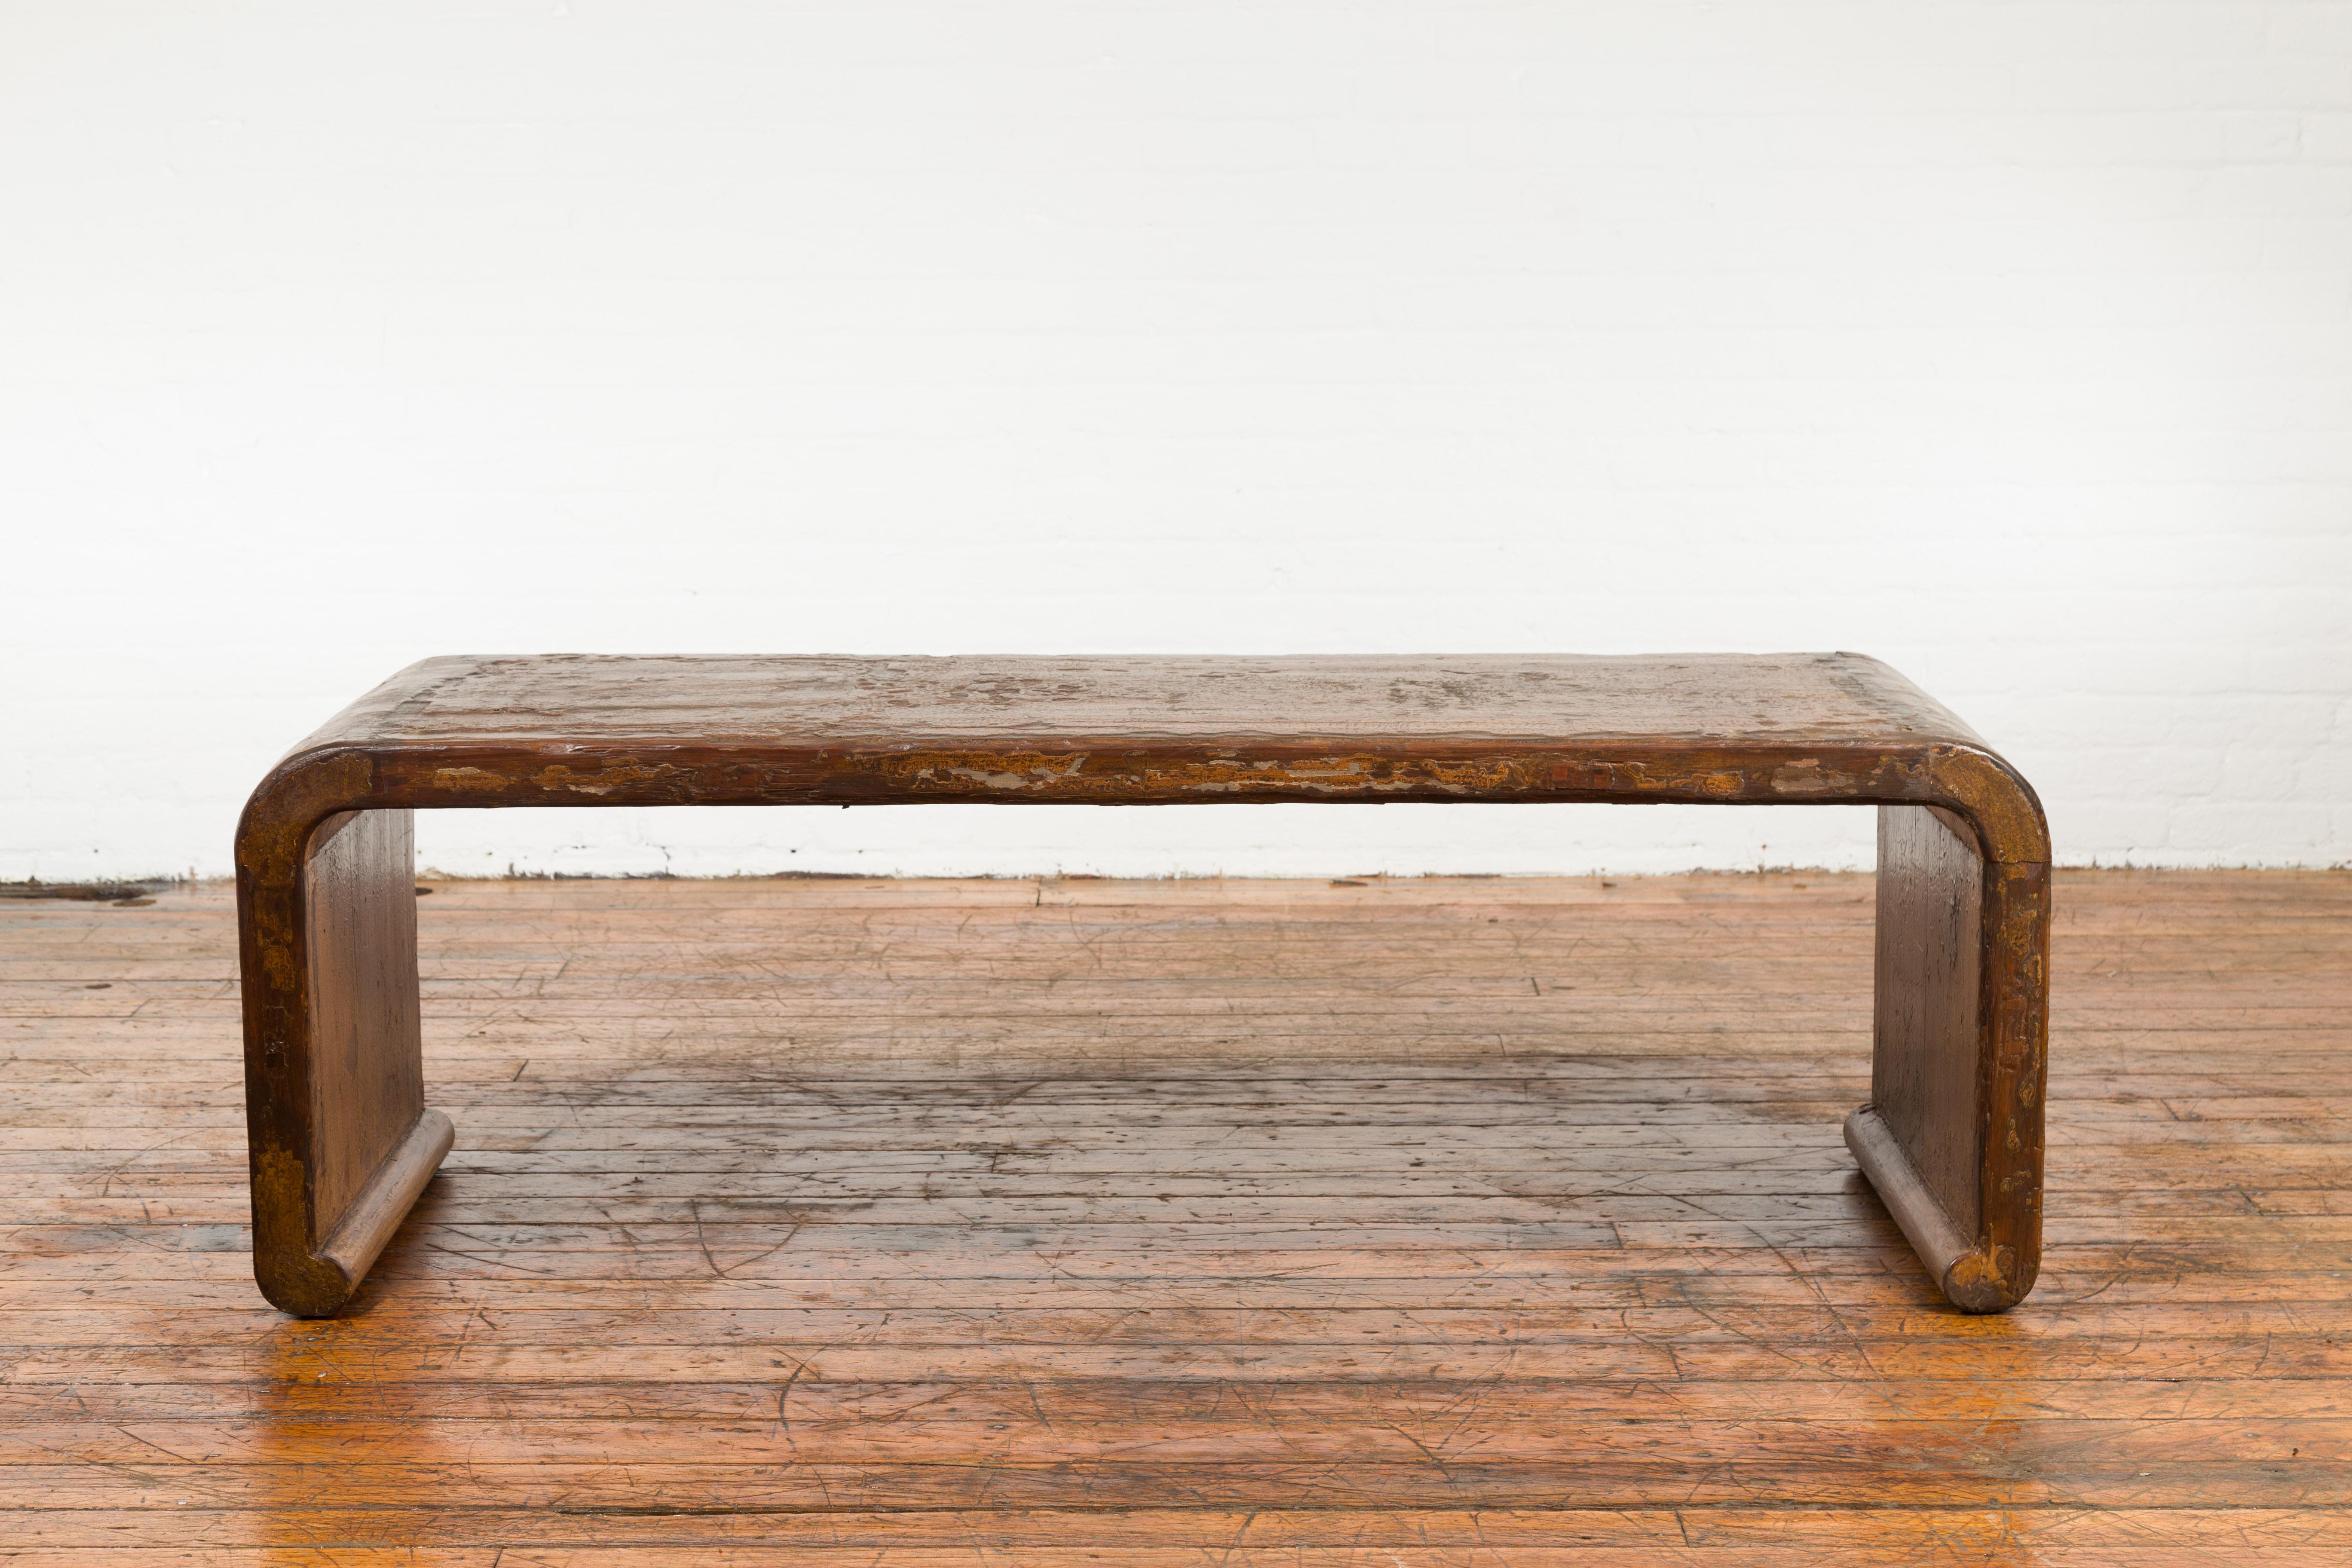 A Chinese Qing Dynasty period wooden waterfall coffee table from the 19th century, with distressed patina. Created in China during the 19th century this coffee table features a waterfall wooden frame with solid boards, boasting a nicely distressed